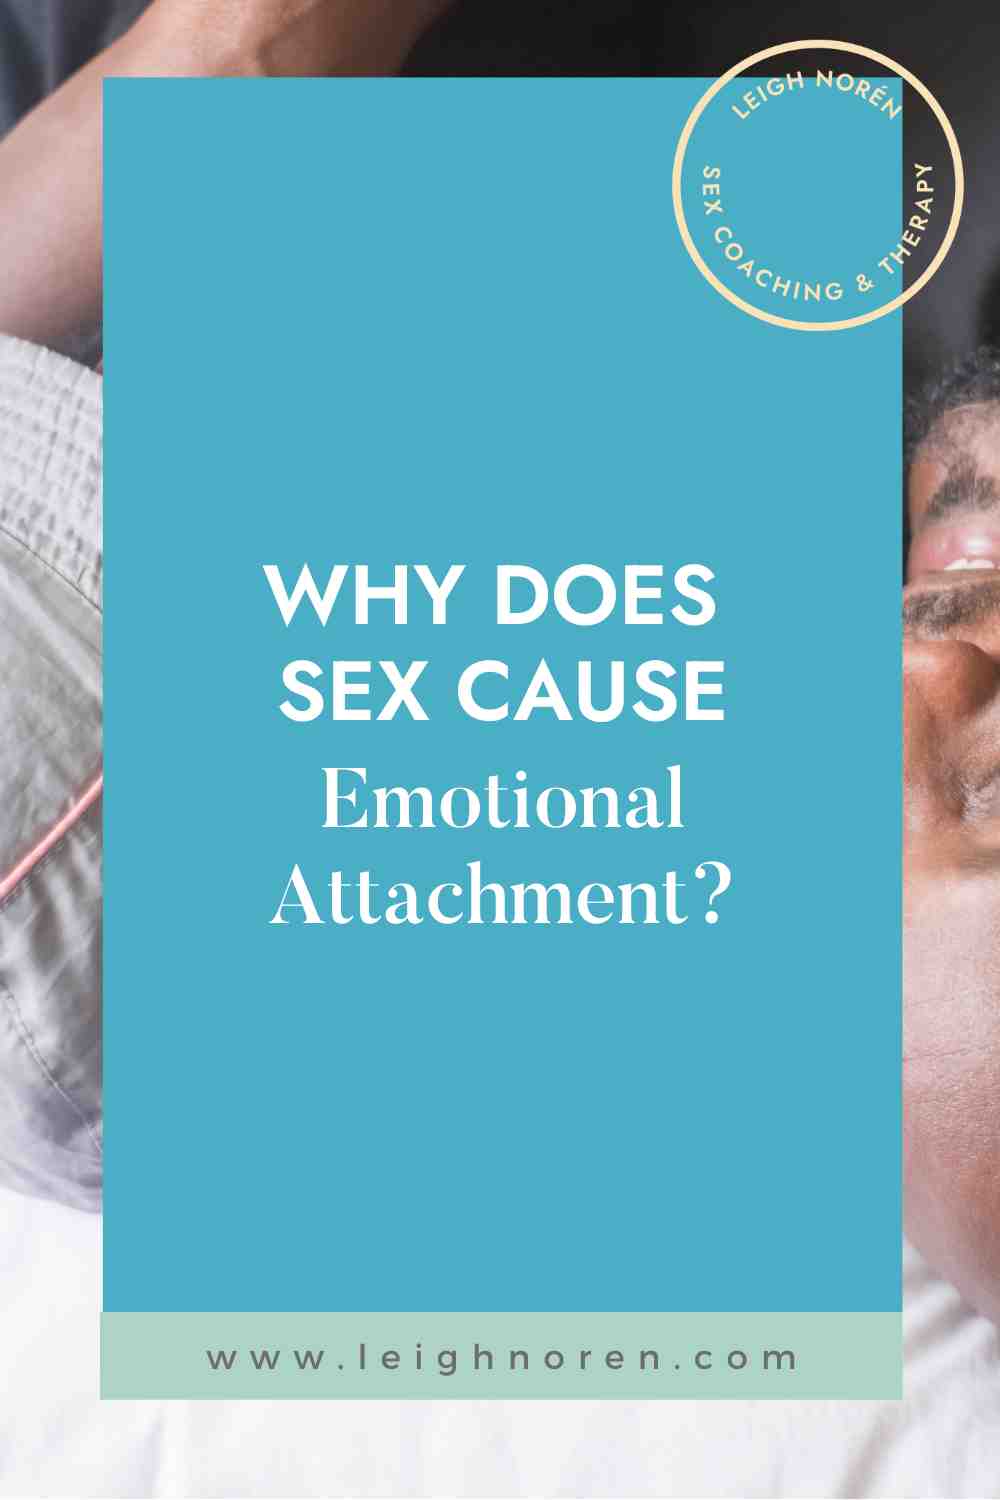 Why Does Sex Cause Emotional Attachment